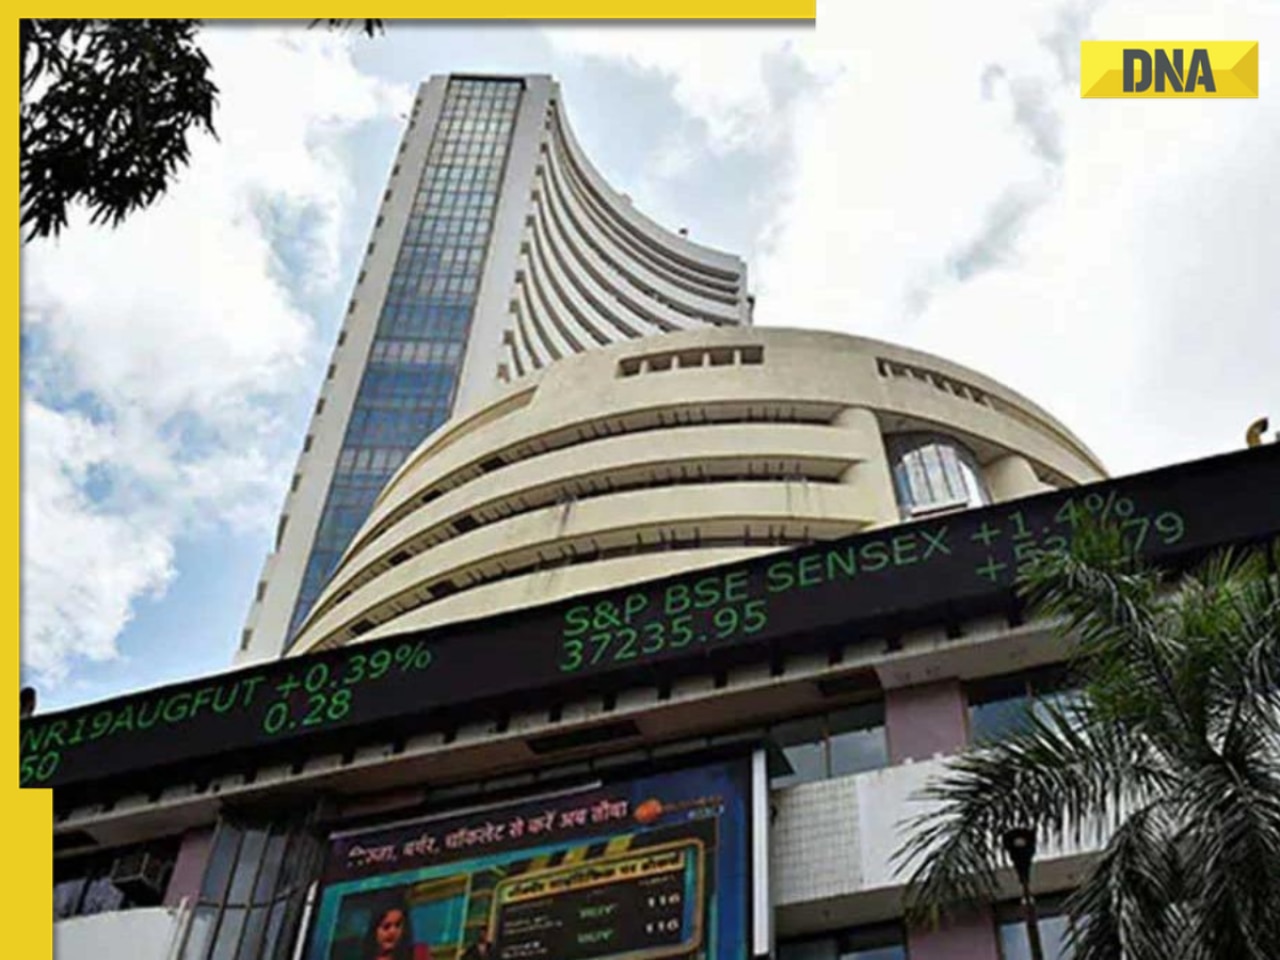 Investors lose Rs 30,00,000 crore in a single day as Sensex, Nifty see record crash following election results